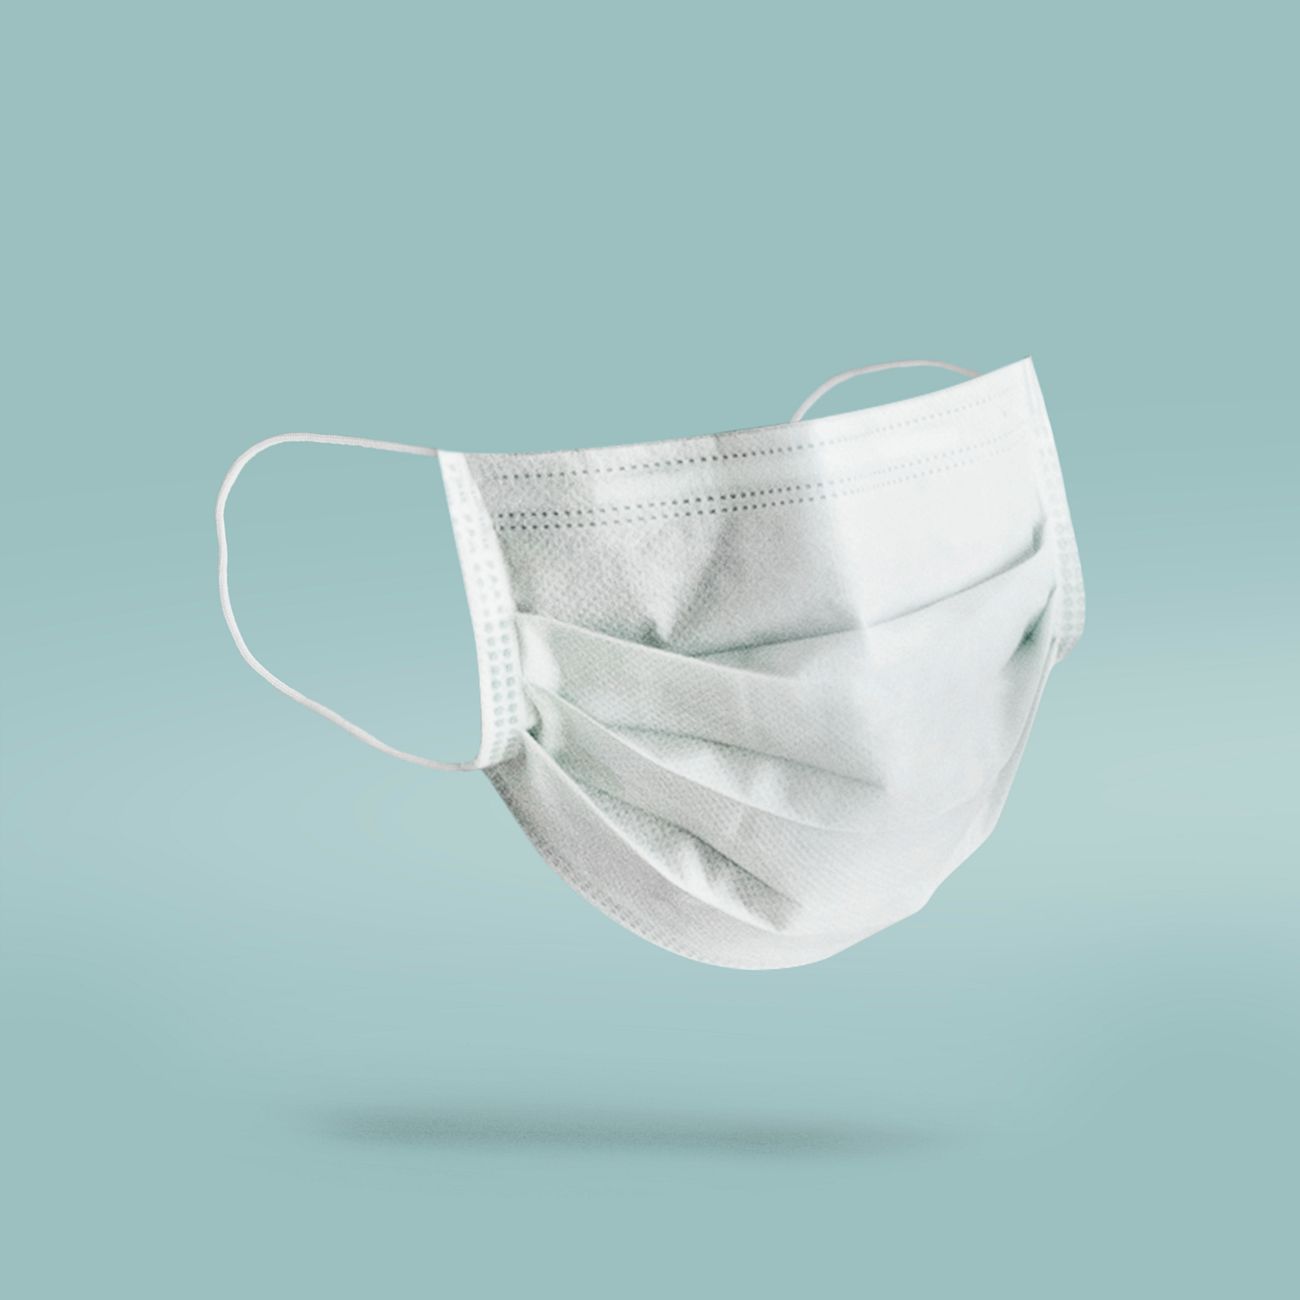 Surgical mask to prevent coronavirus infection mockup | Free psd mockup - 2297630